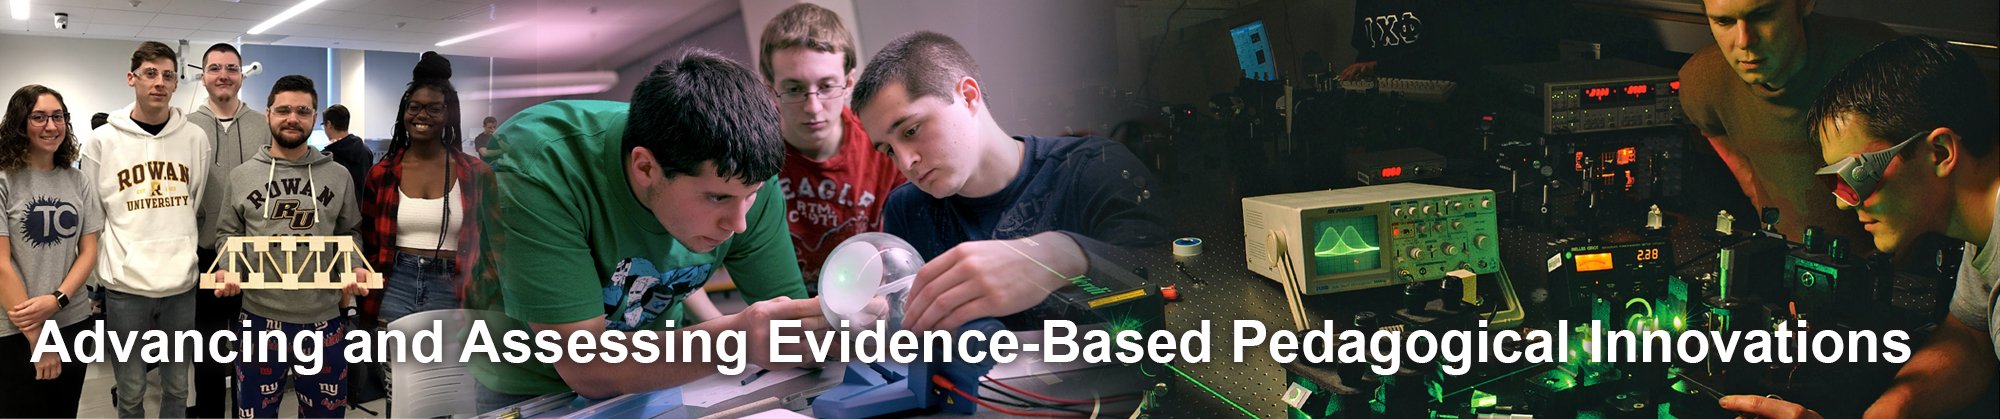 advancing-and-assessing-evidence-based-pedagogical-innovations